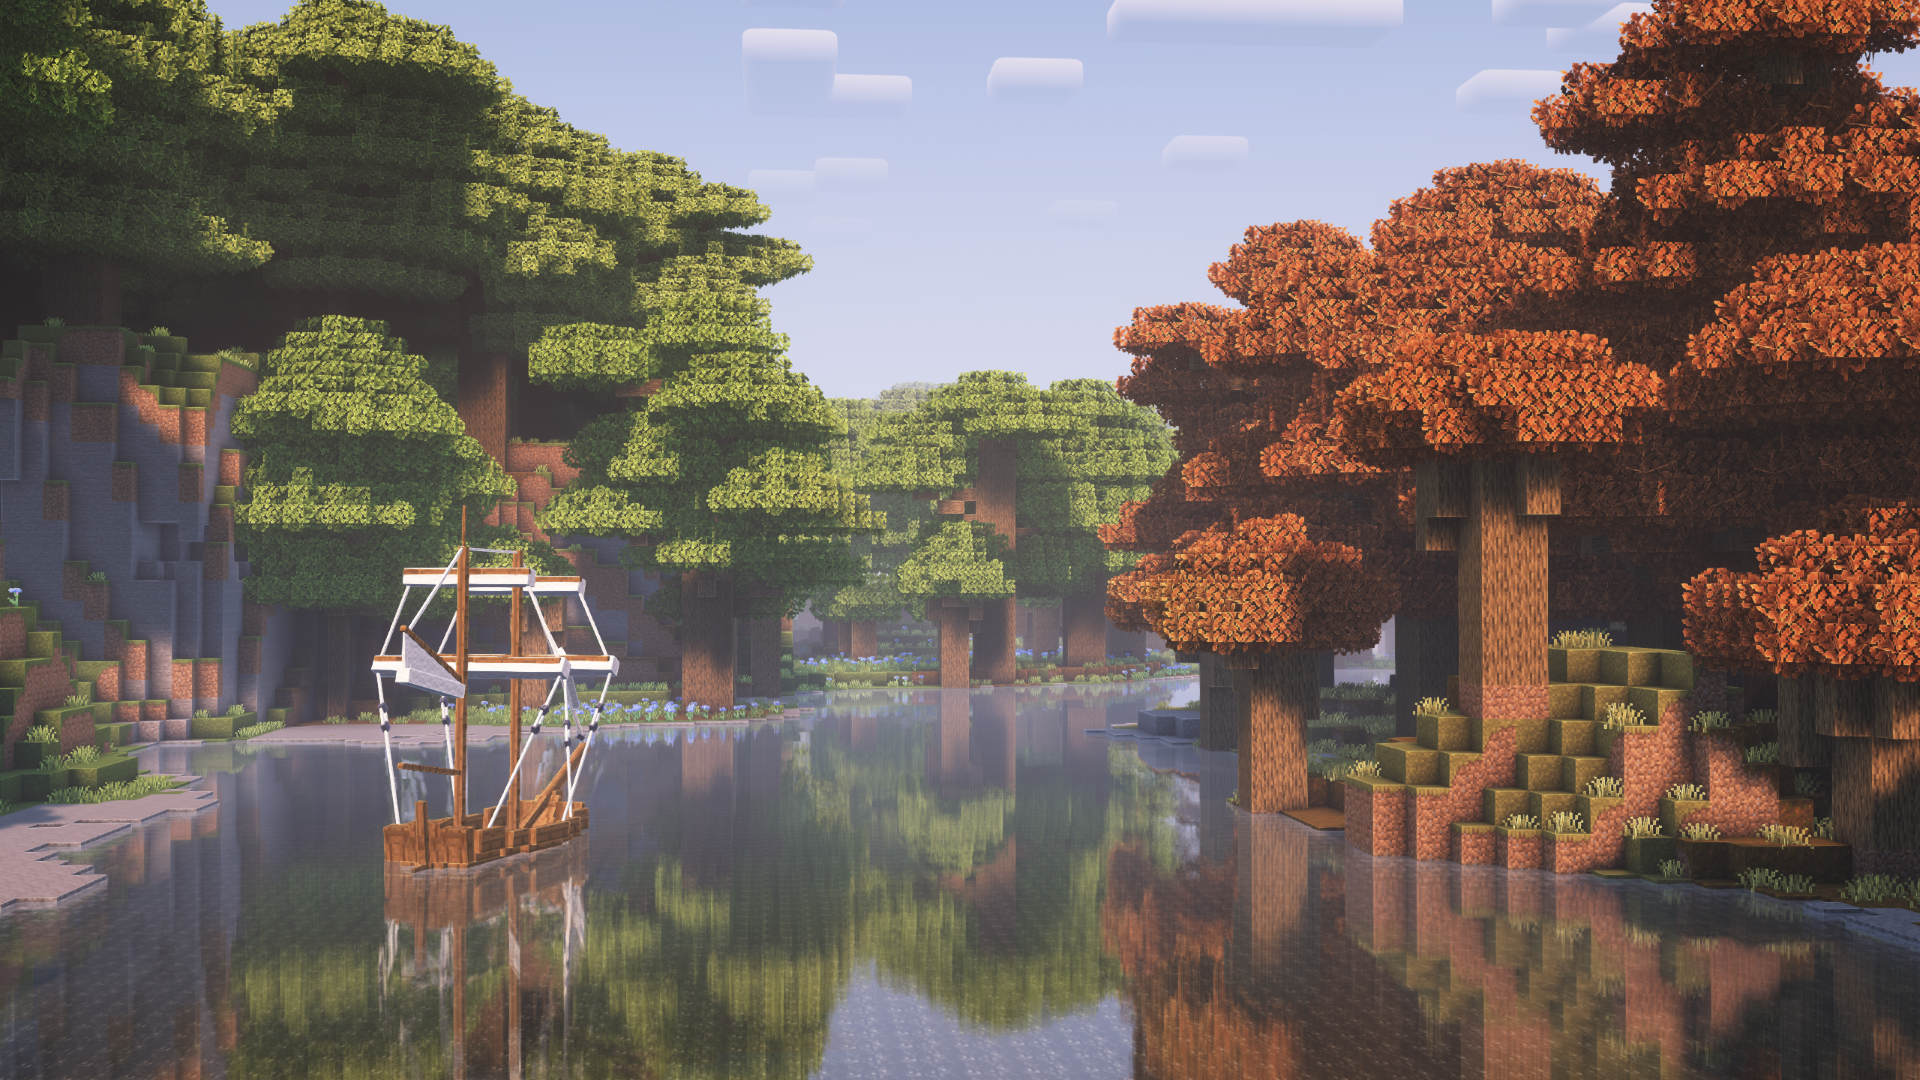 Small Ships' "Brig" floating in a forest river